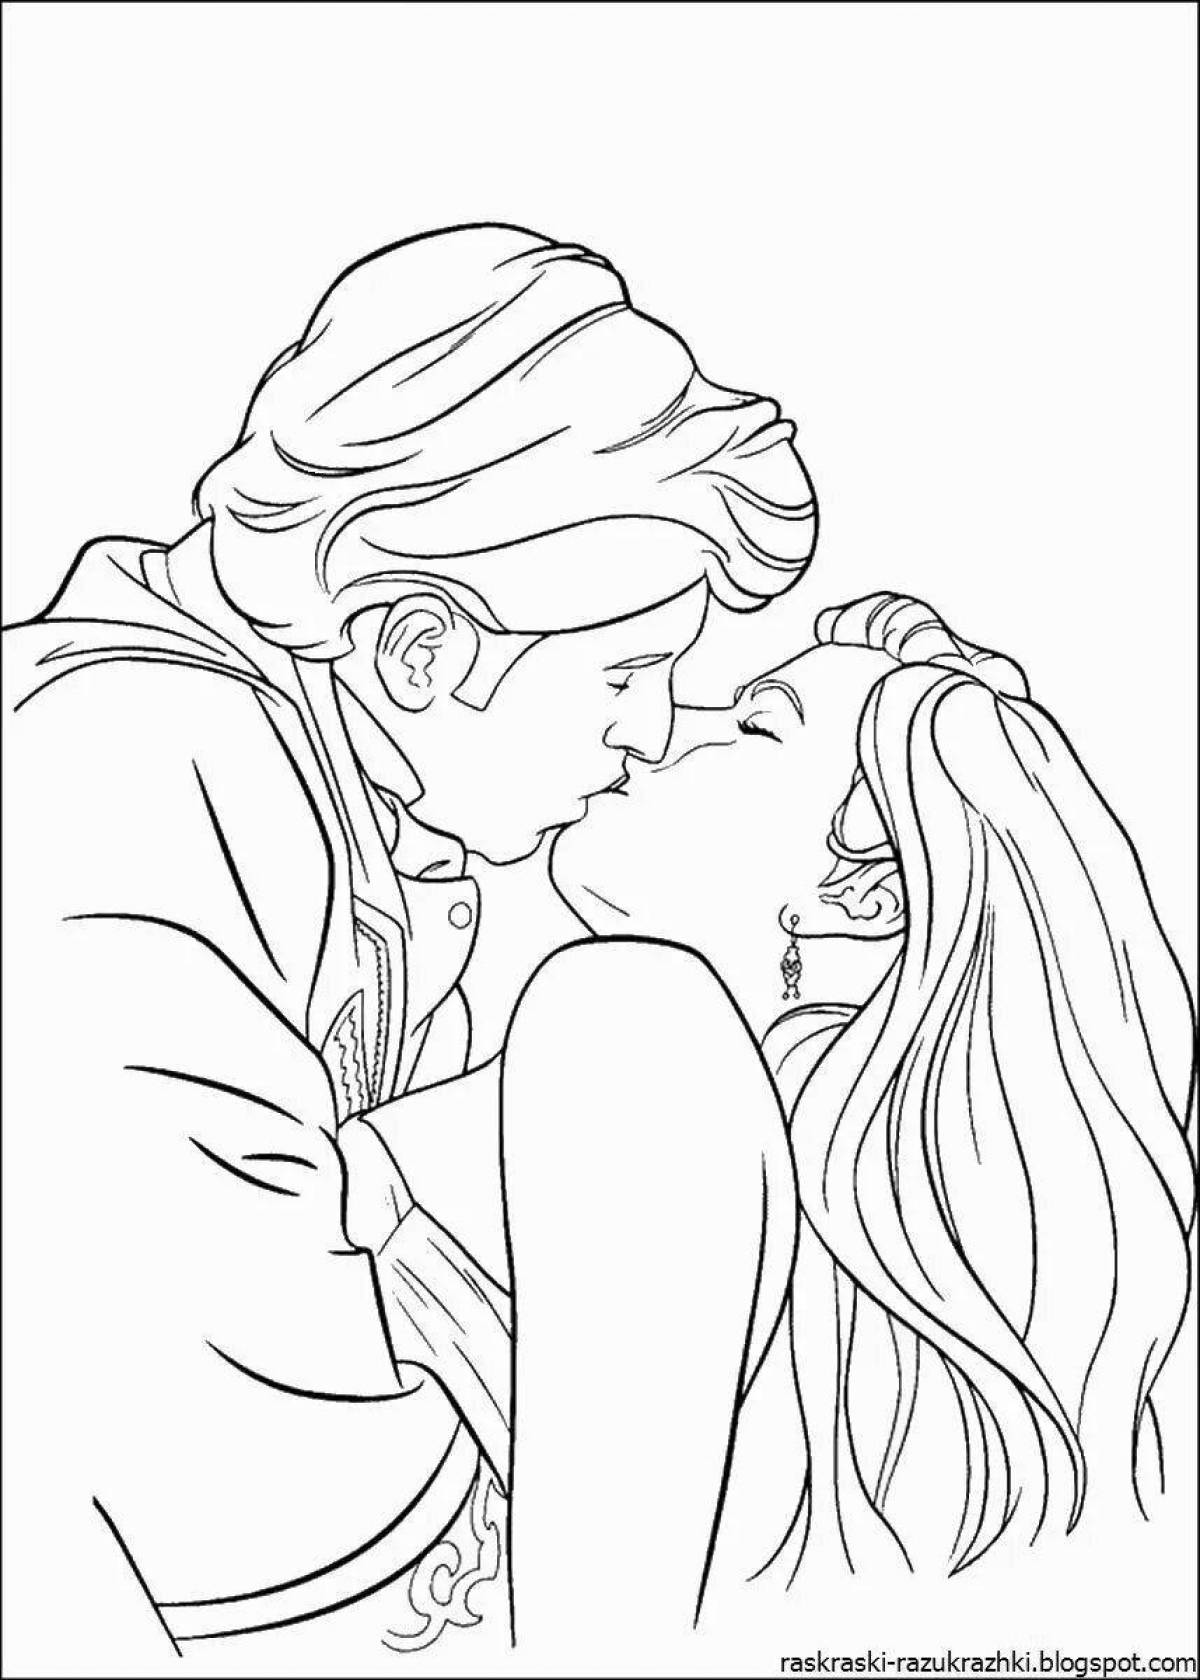 Glowing coloring page 18 plus